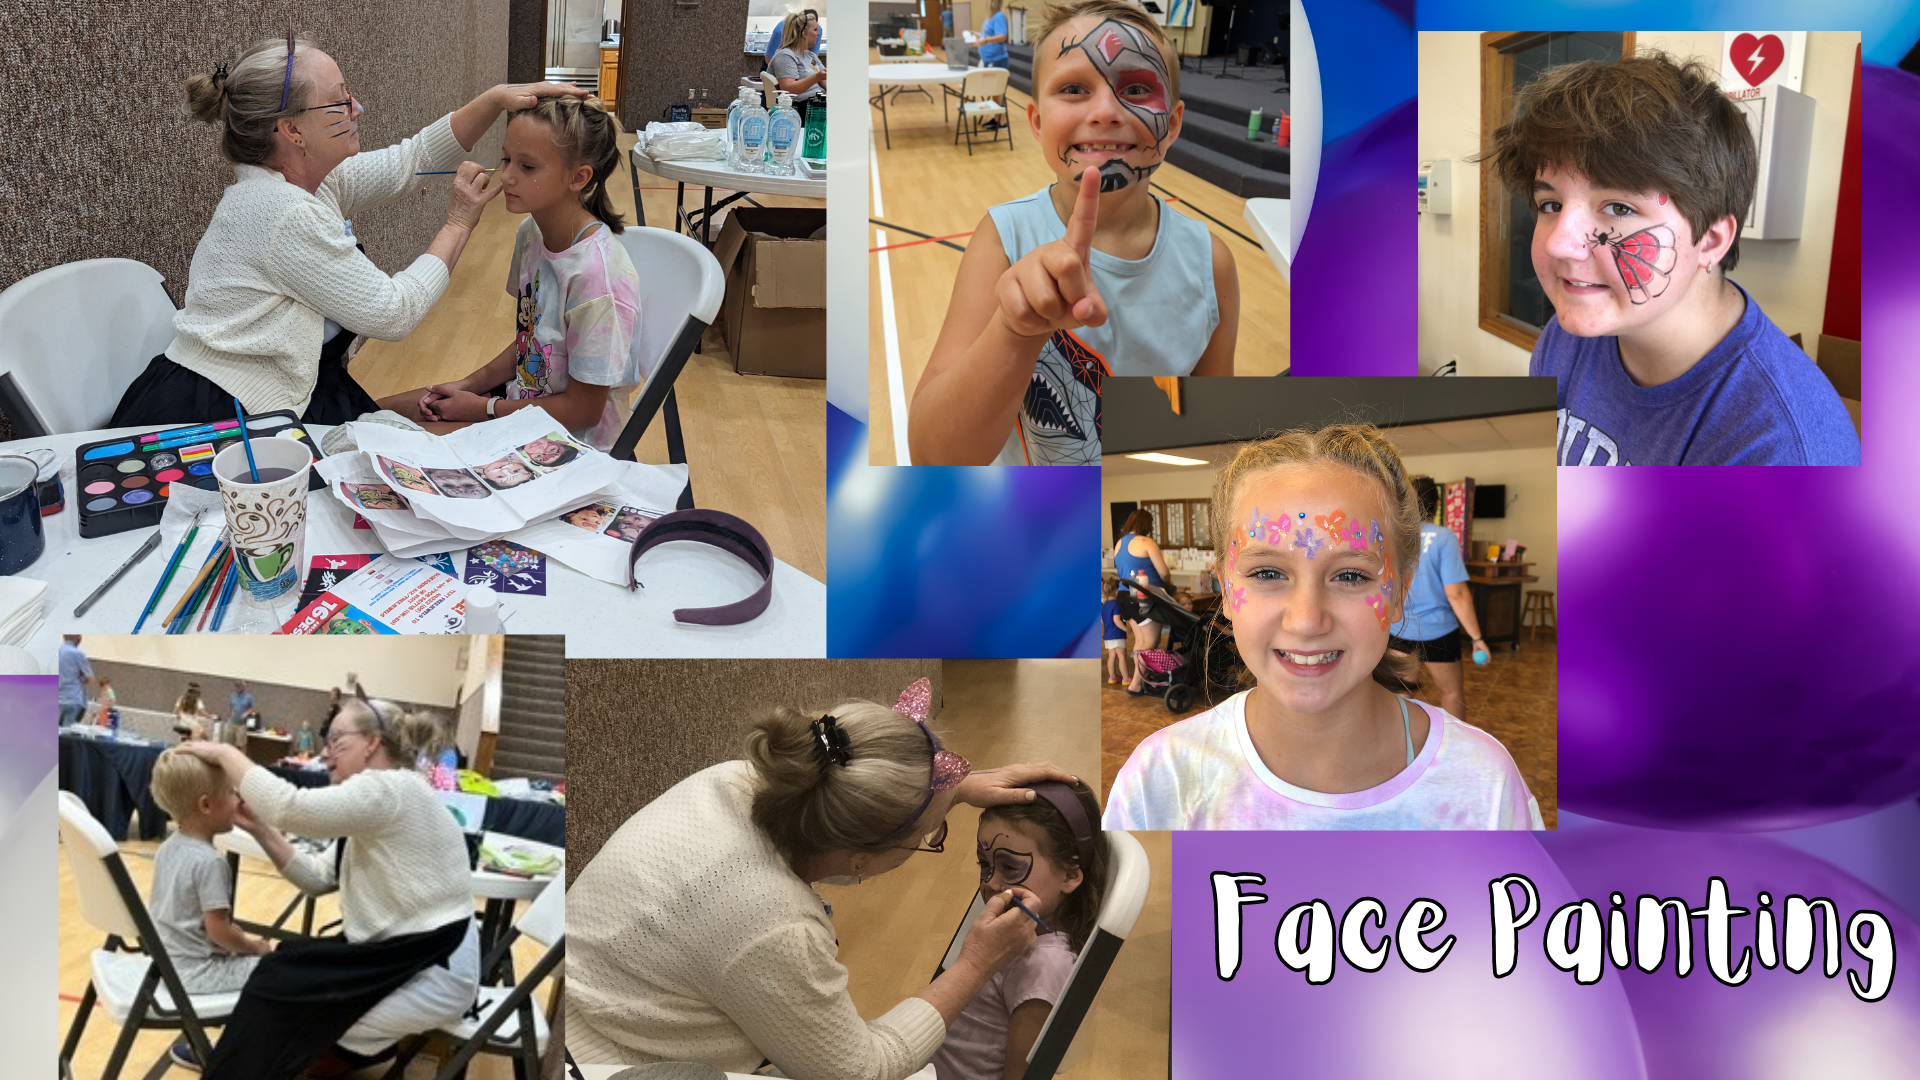 Face painting flyer on the website